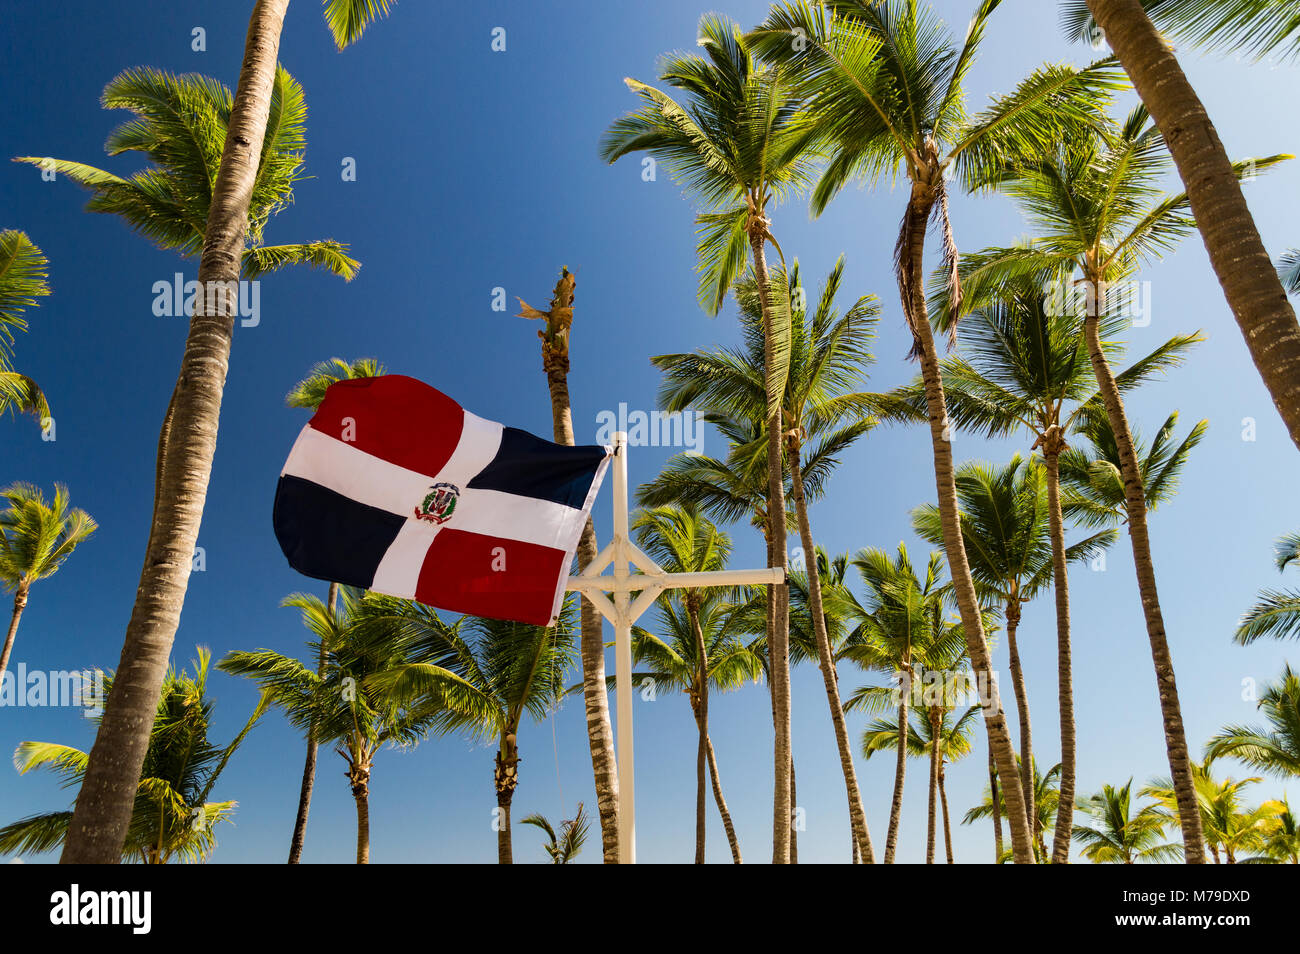 The flag of the Dominican republic fluttering in the wind, amongst the palm trees and against a blue sky in the Caribbean. Stock Photo